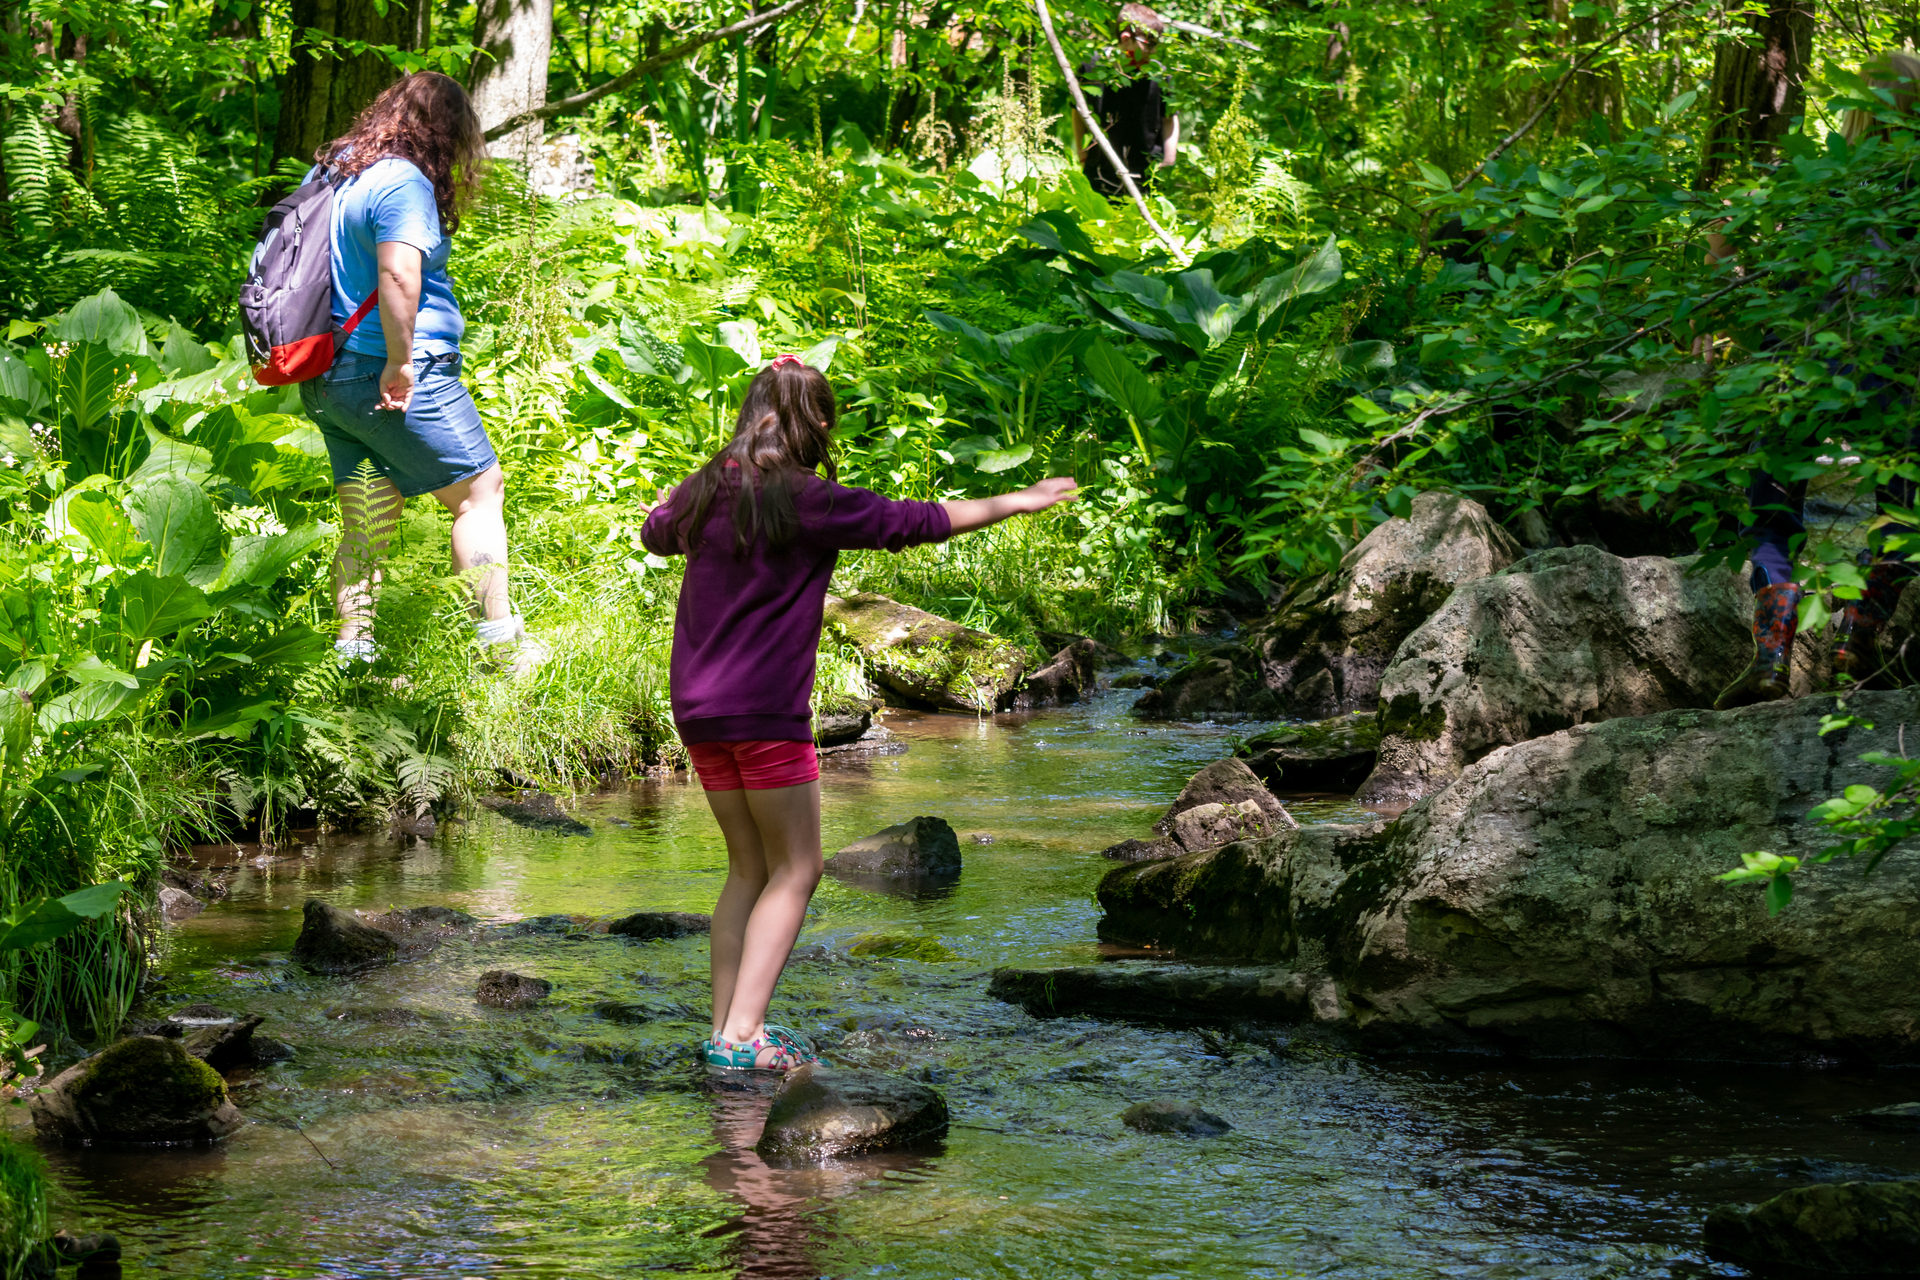 Two campers exploring brook, one stepping on stones in the water